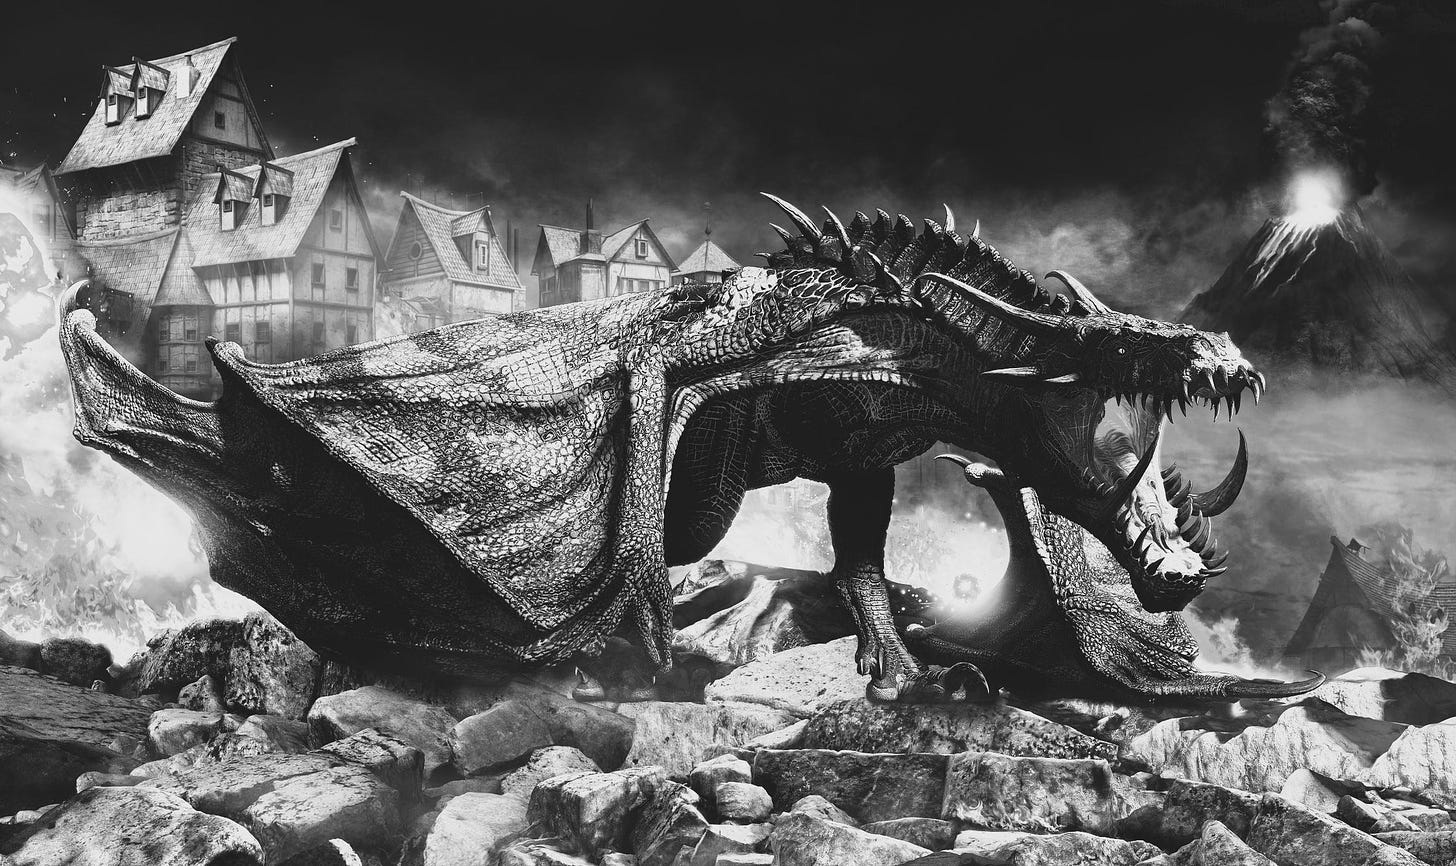 A fire dragon coming out of the rubble of a village he has destroyed.